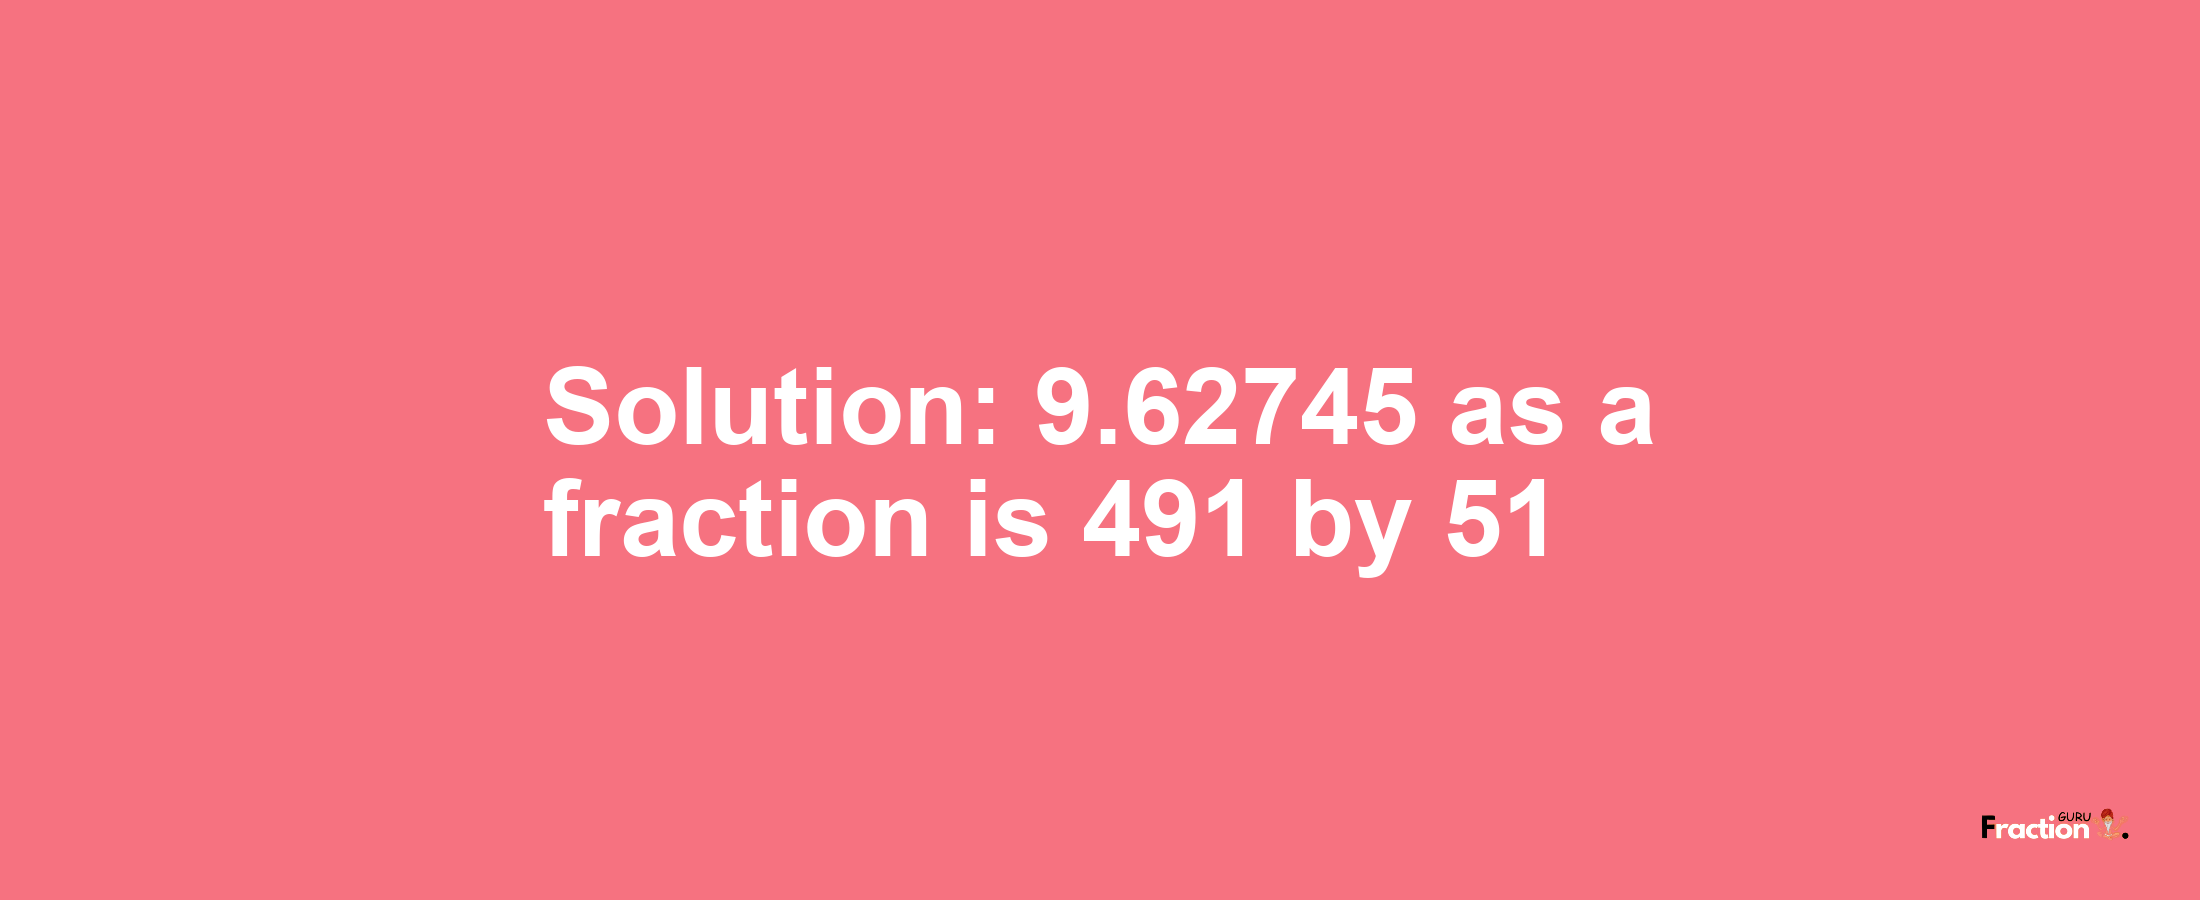 Solution:9.62745 as a fraction is 491/51